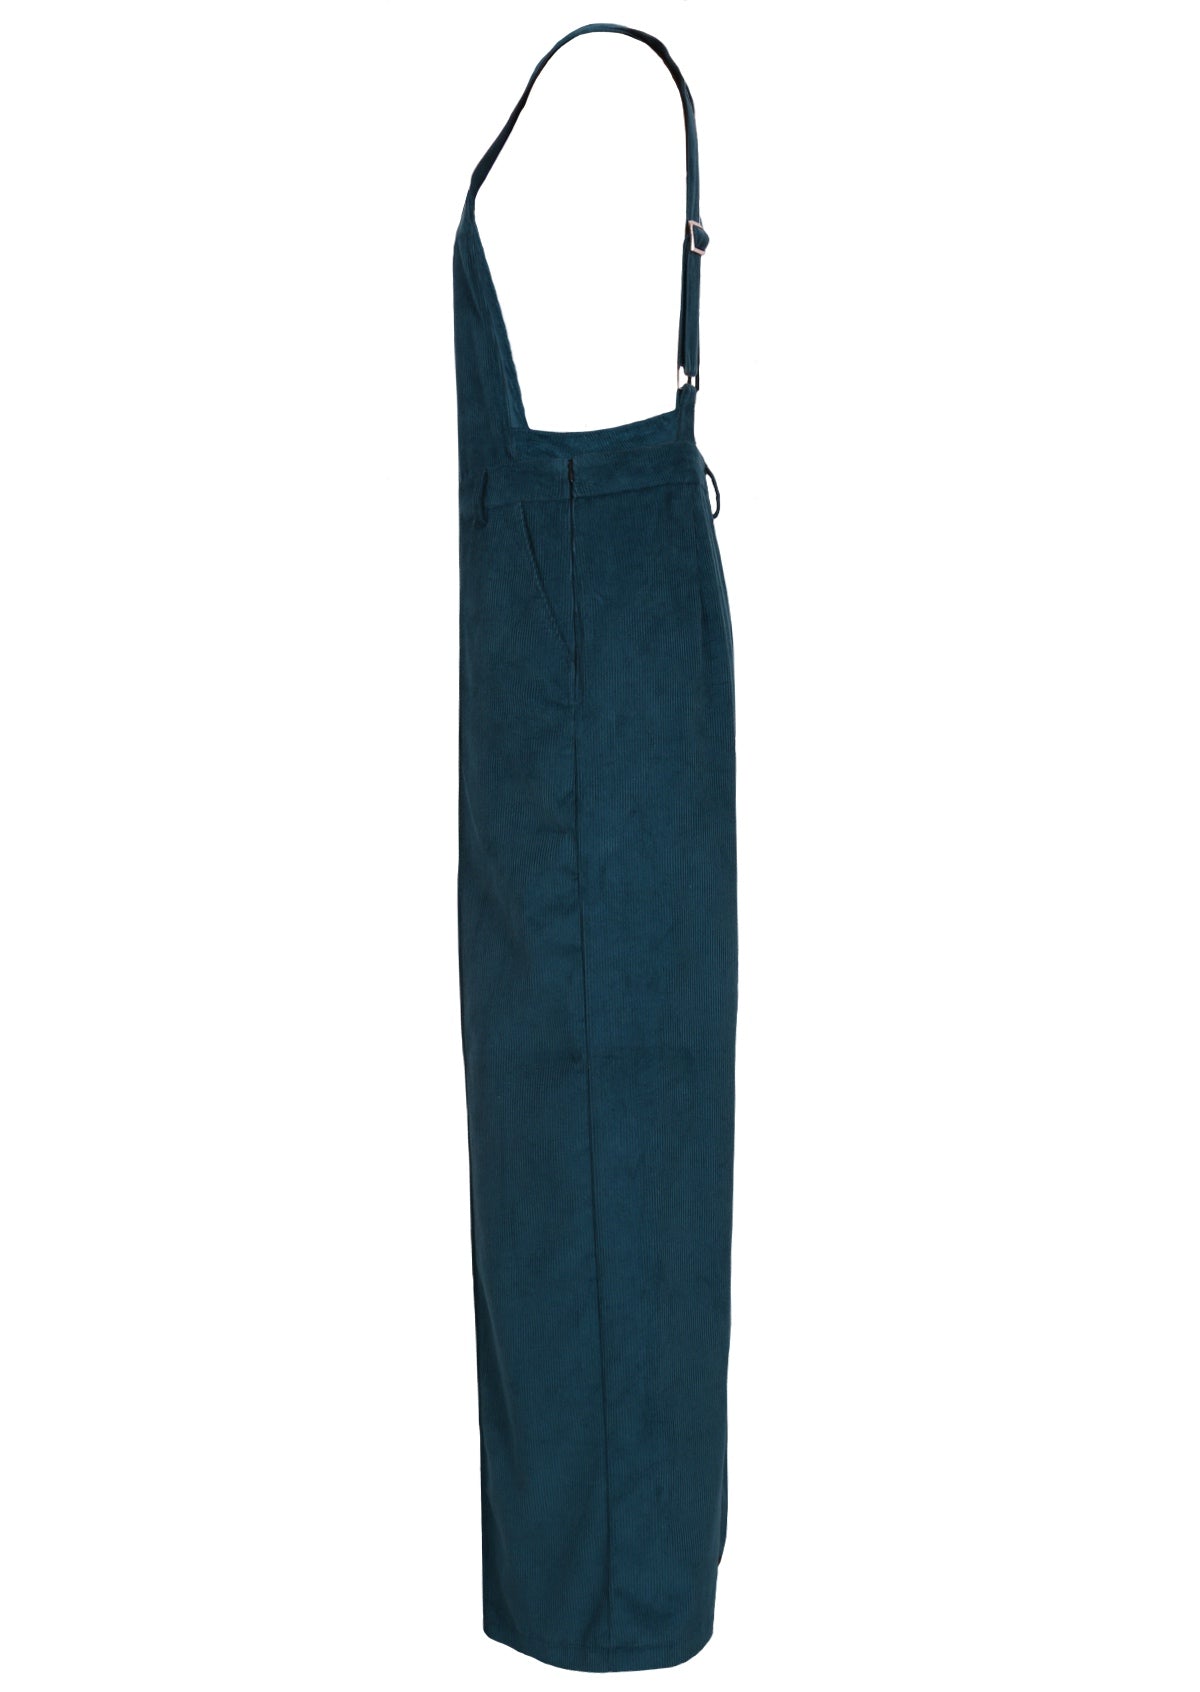 Deep teal cotton corduroy overalls have a side zip for ease of putting them on. 